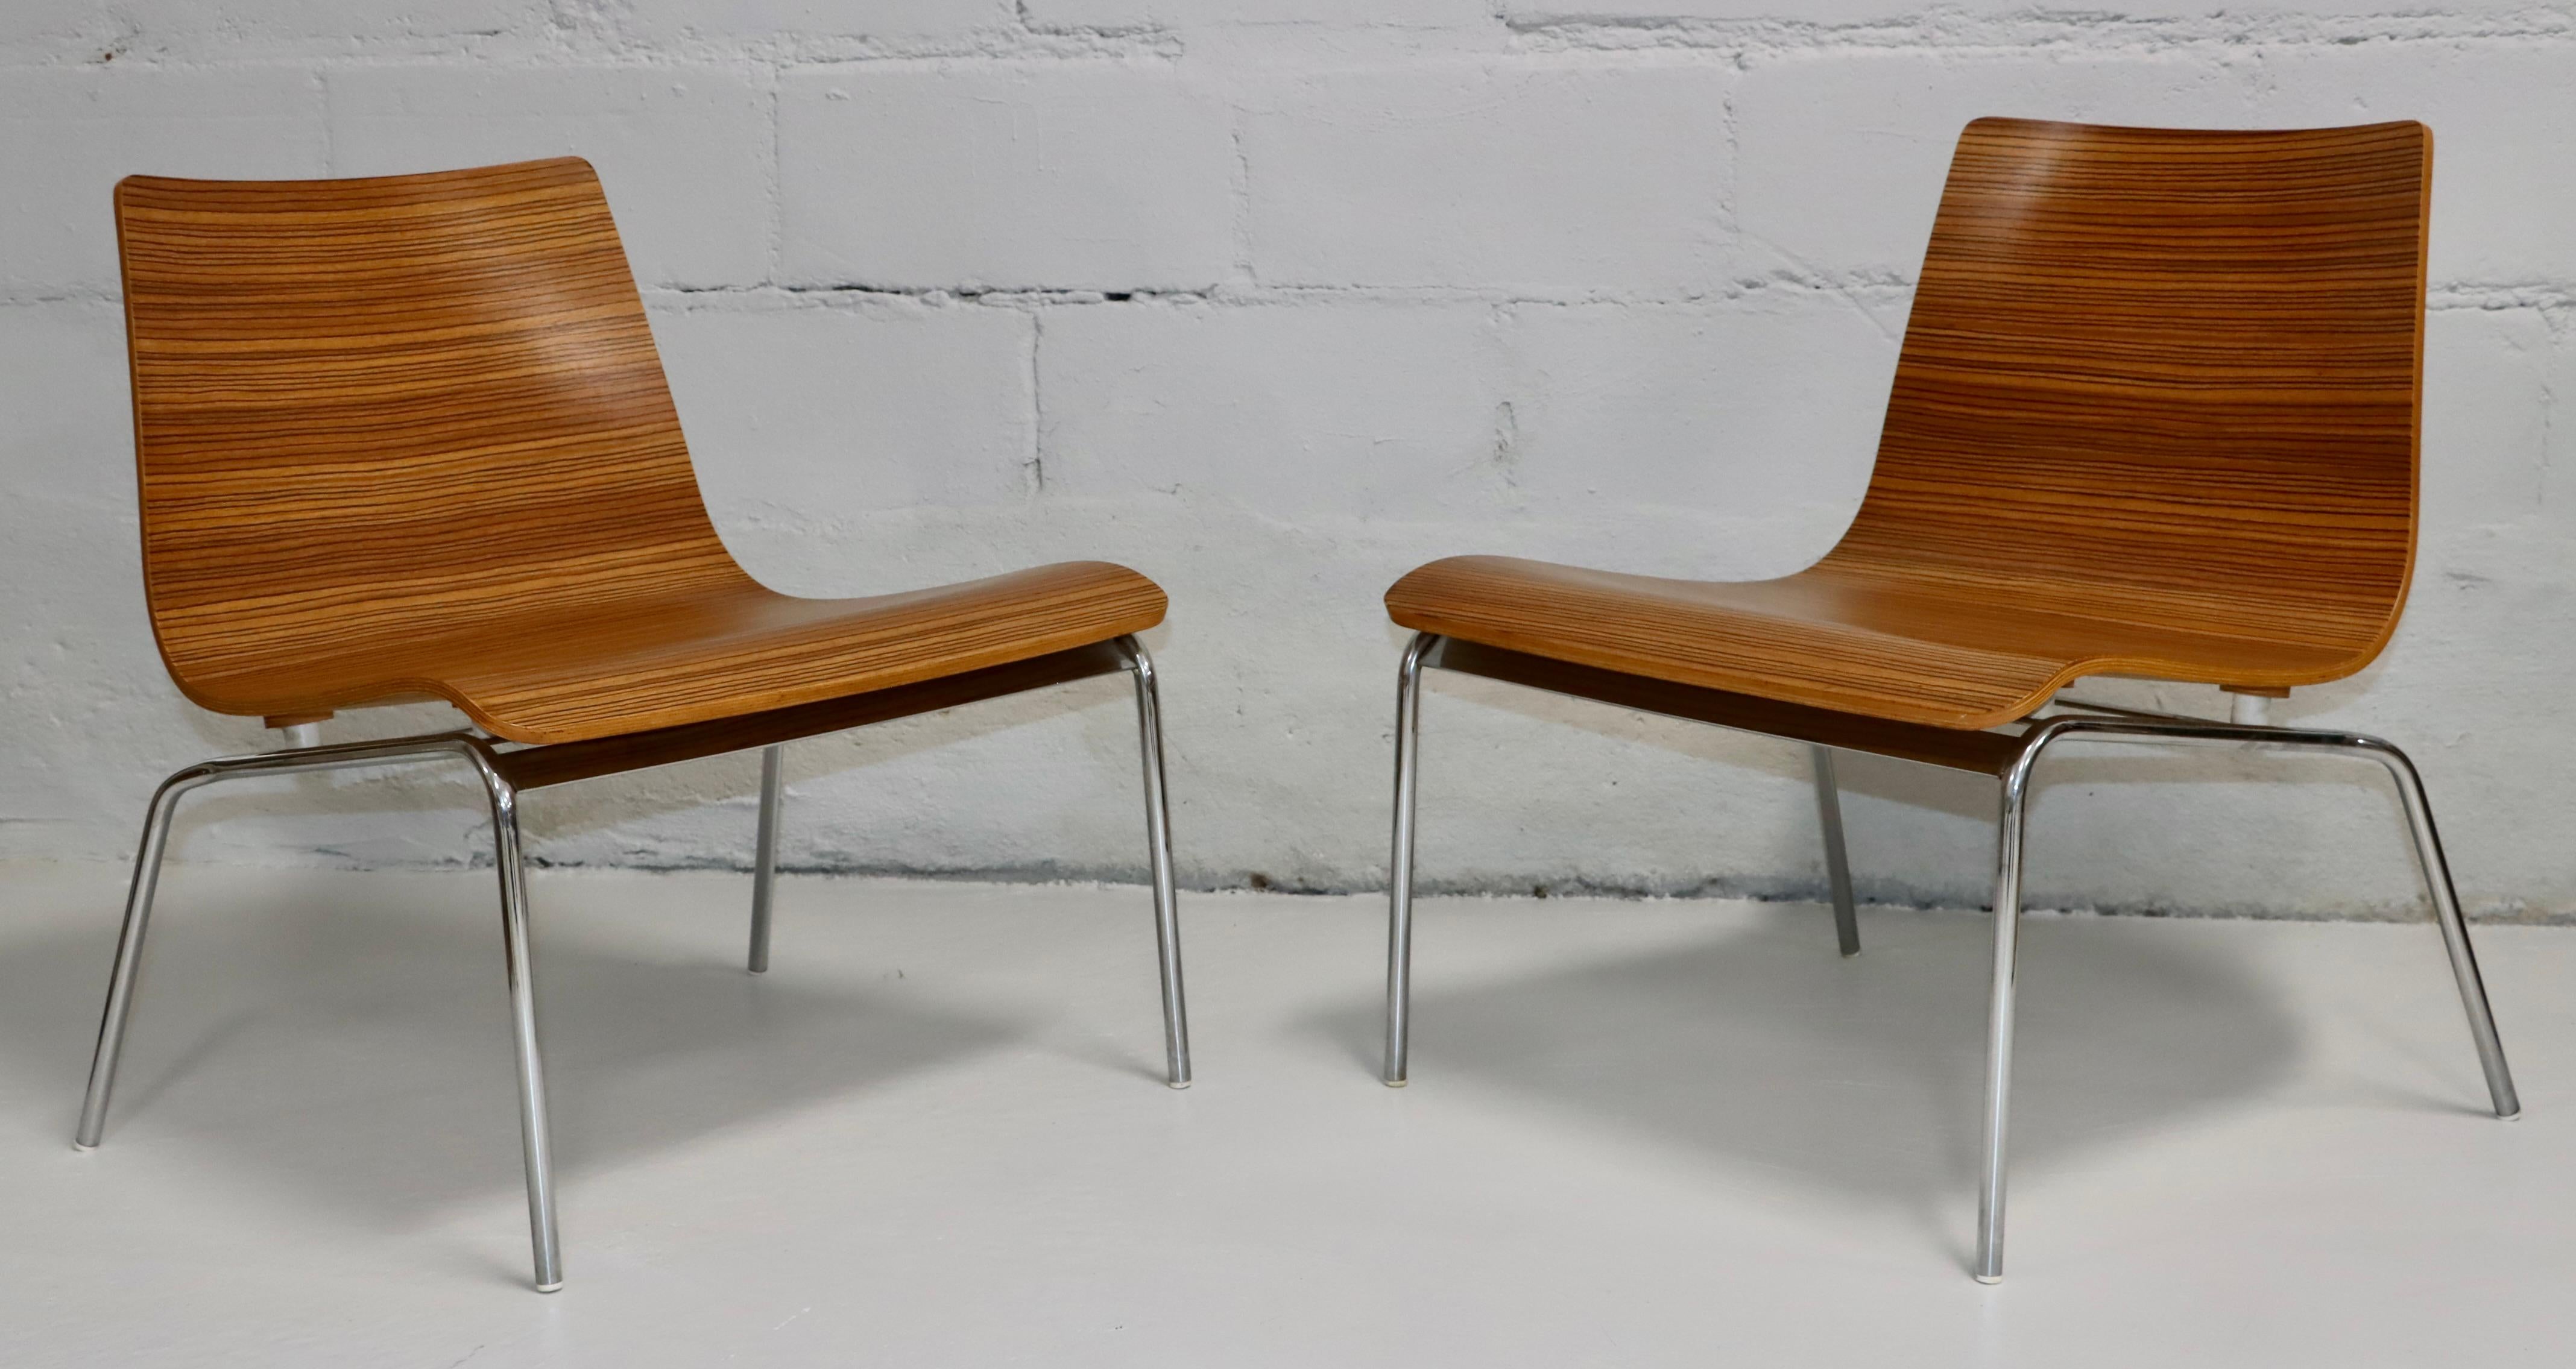 Beautiful pair of Billiani 1911 Zebra-wood and chrome modern slipper chairs, in vintage original condition with minor wear and patina due to age and use.